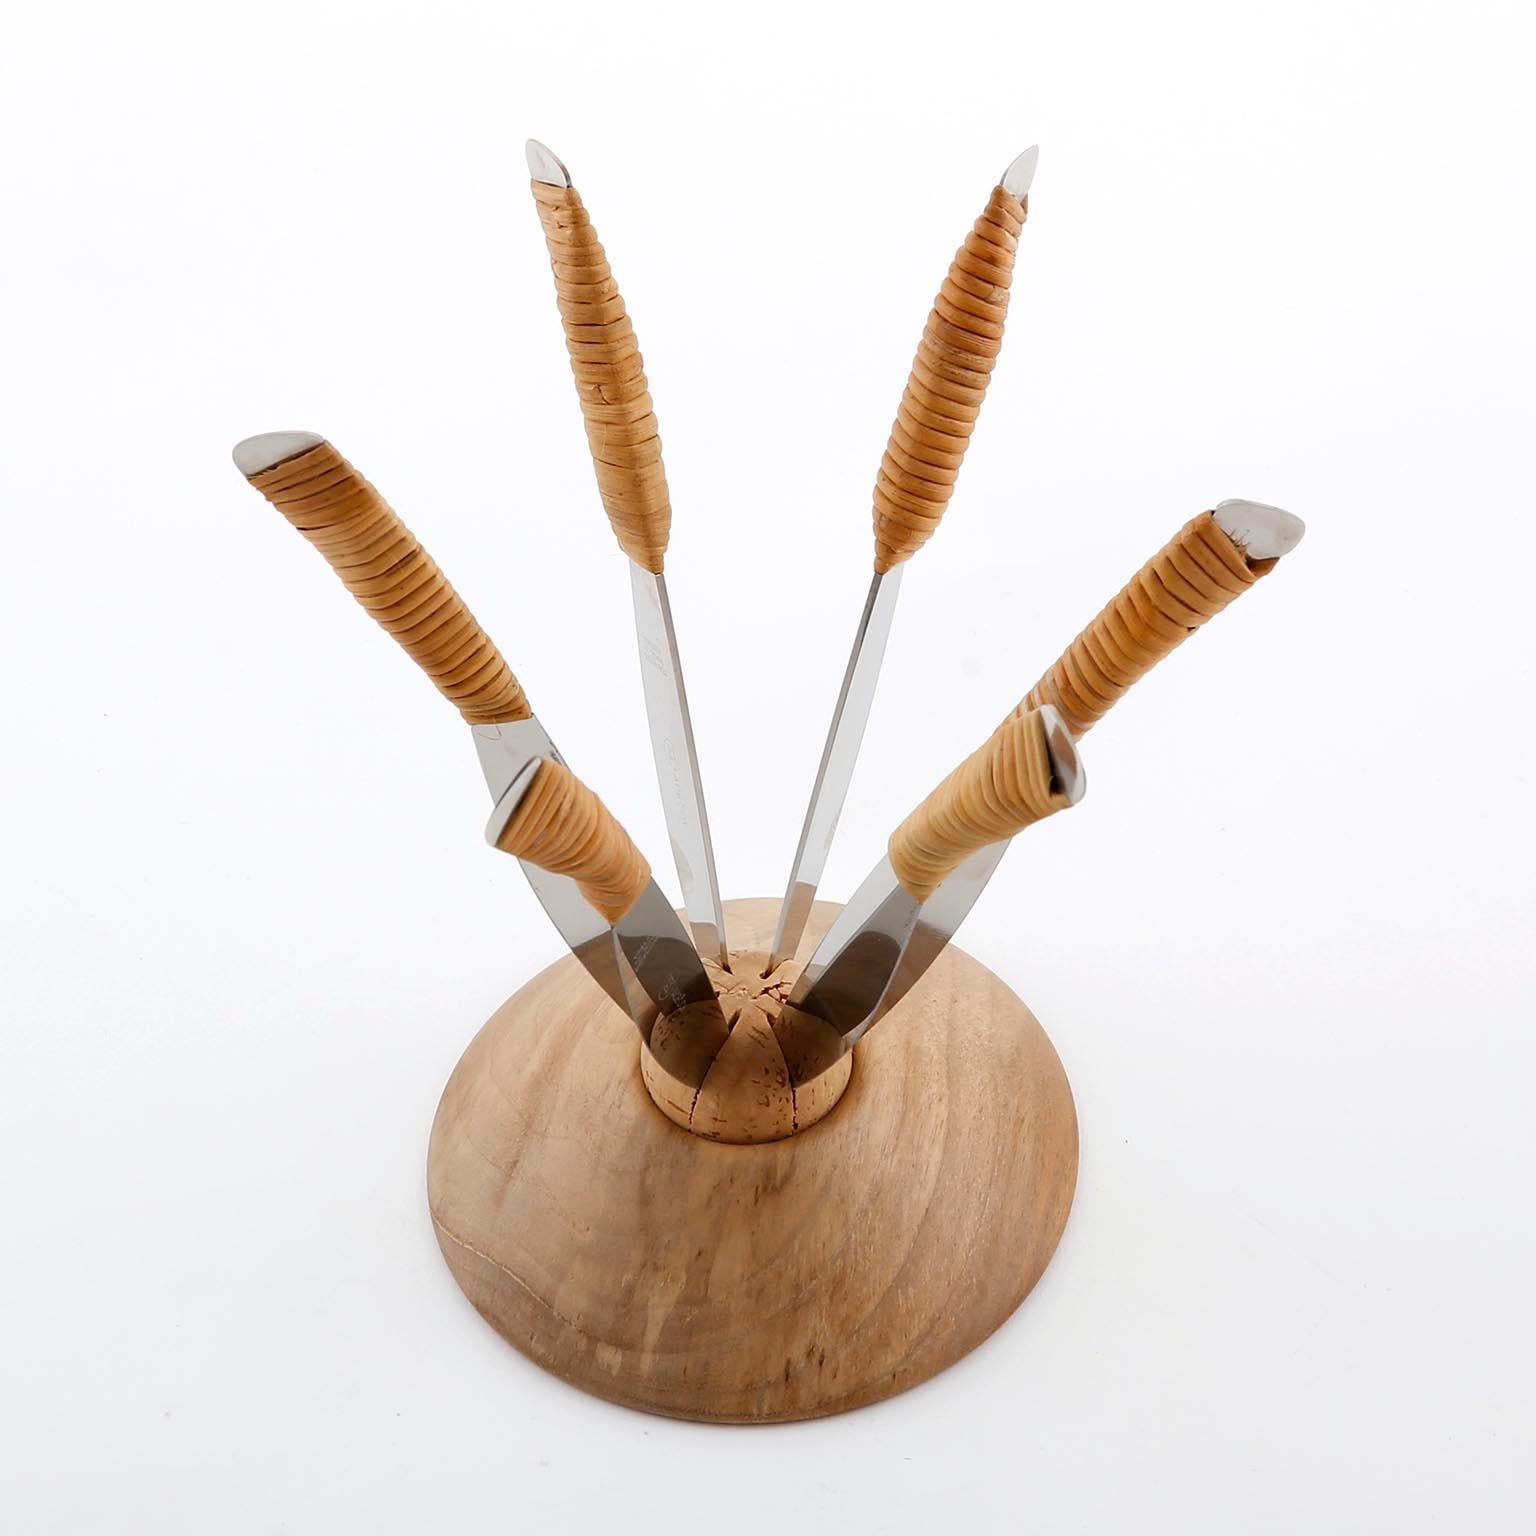 A knife holder set with six knives designed by Carl Auböck, manufactured by Carl Auböck workshop in midcentury, Vienna, circa 1950.
Great to accompany a cheese board or fruit course. 
The holder is made of wood and cork. The knives are made of